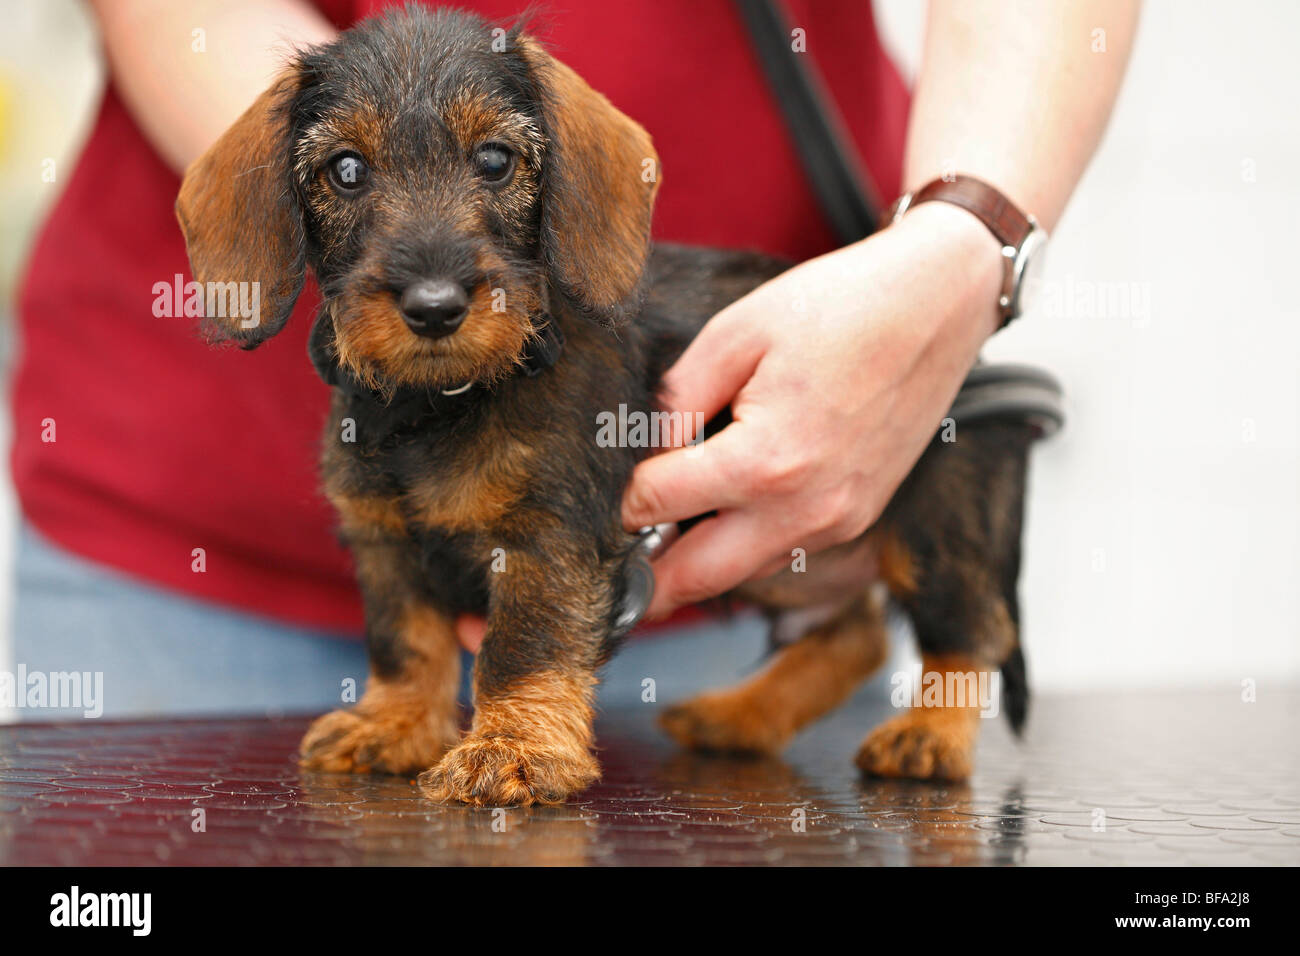 dachshund, sausage dog, domestic dog (Canis lupus f. familiaris), veterinary examins the heart beat of a nine weeks old puppy, Stock Photo